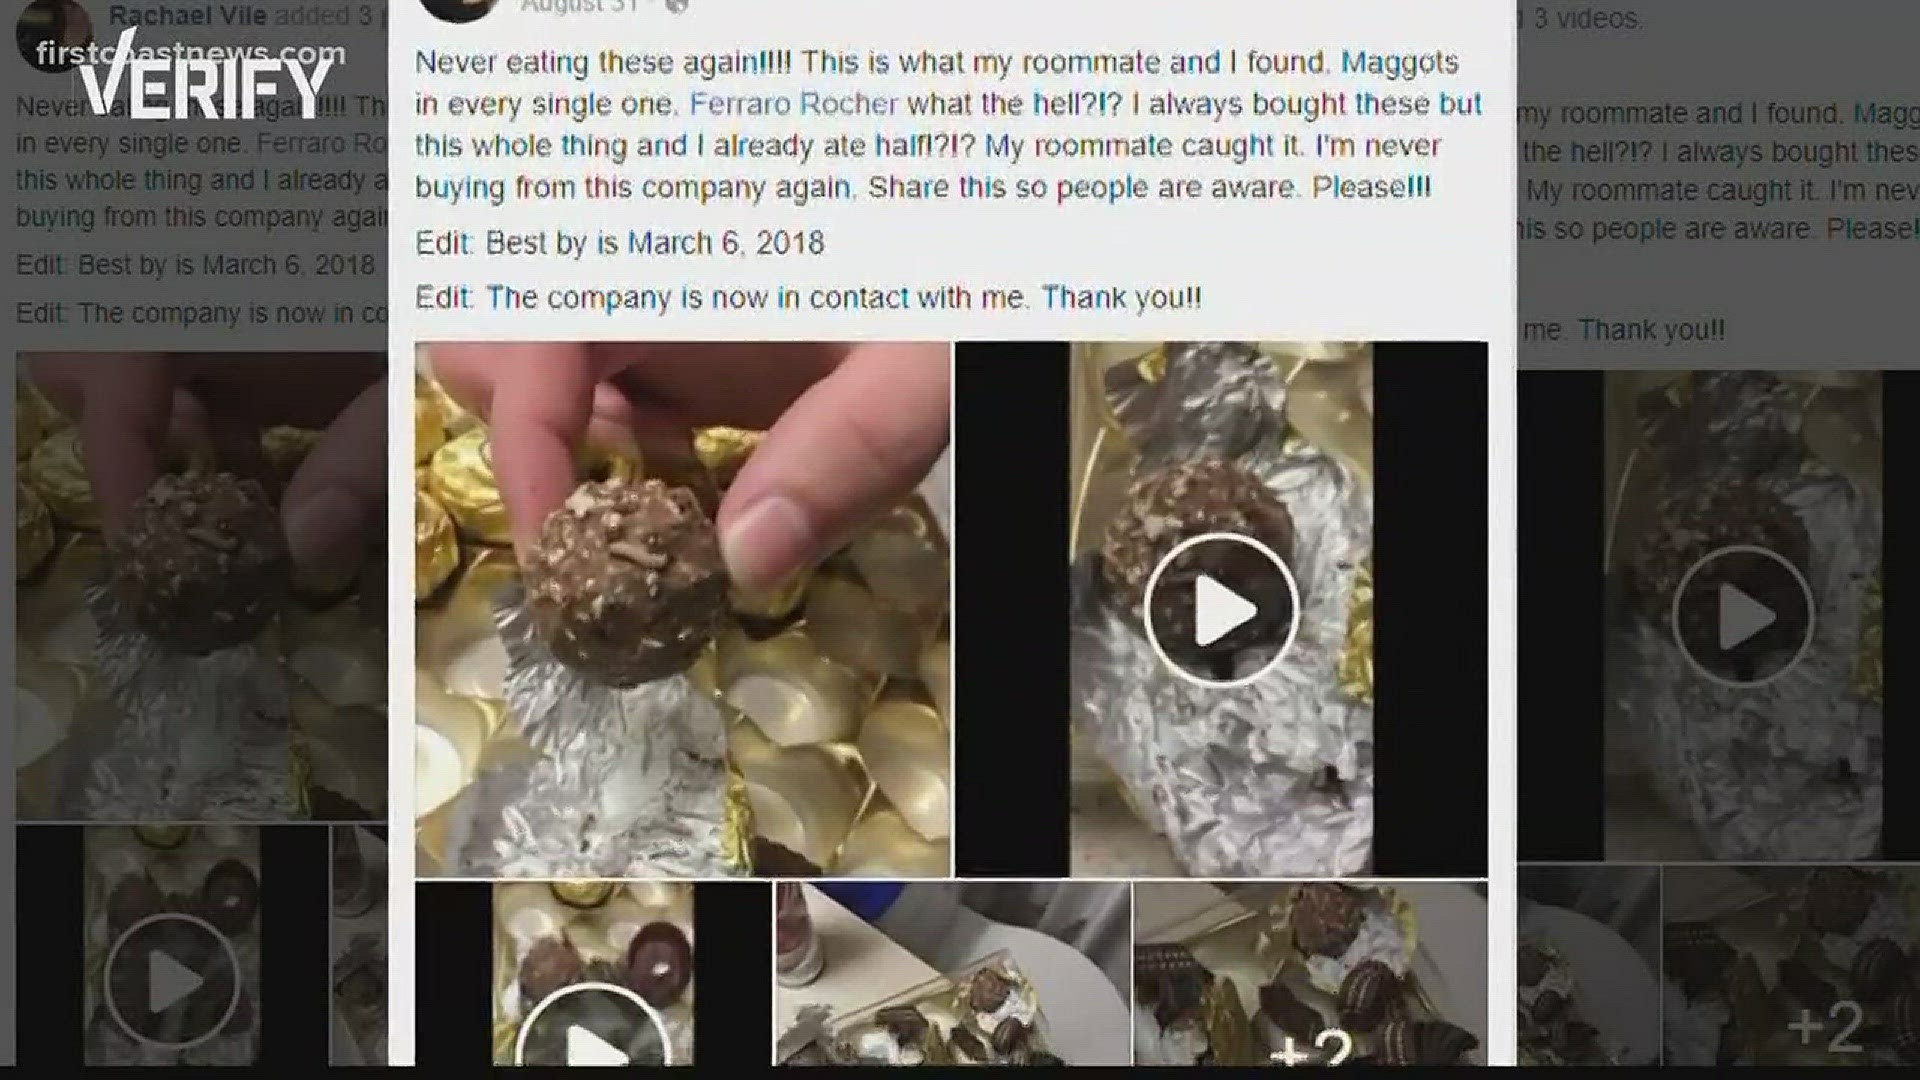 The video we are about to show you seems to show some type of worm crawling all over a Ferrero Rocher chocolate. But it is real?